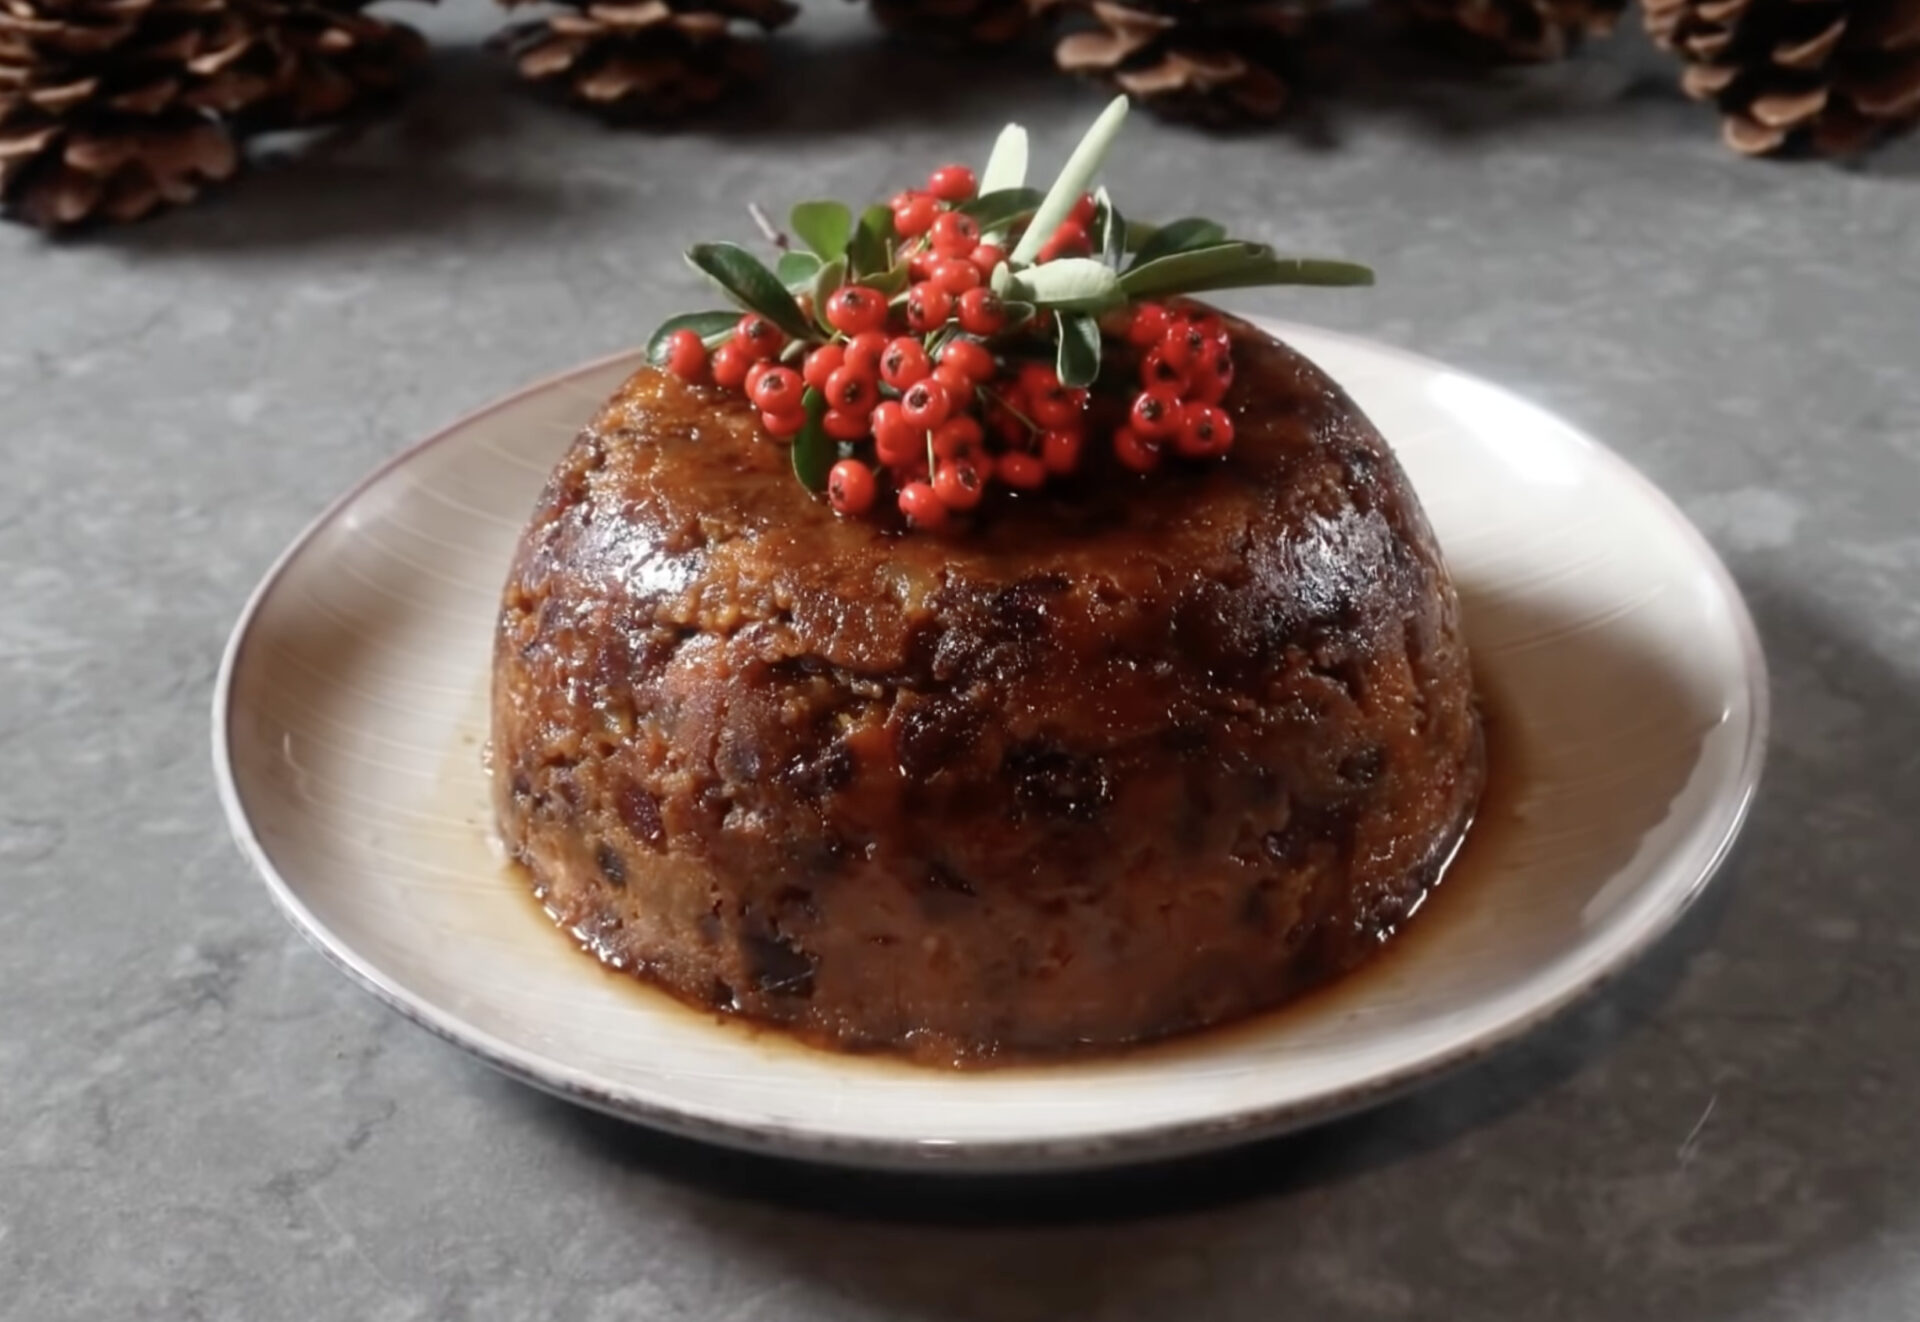 The Queen's Christmas Pudding